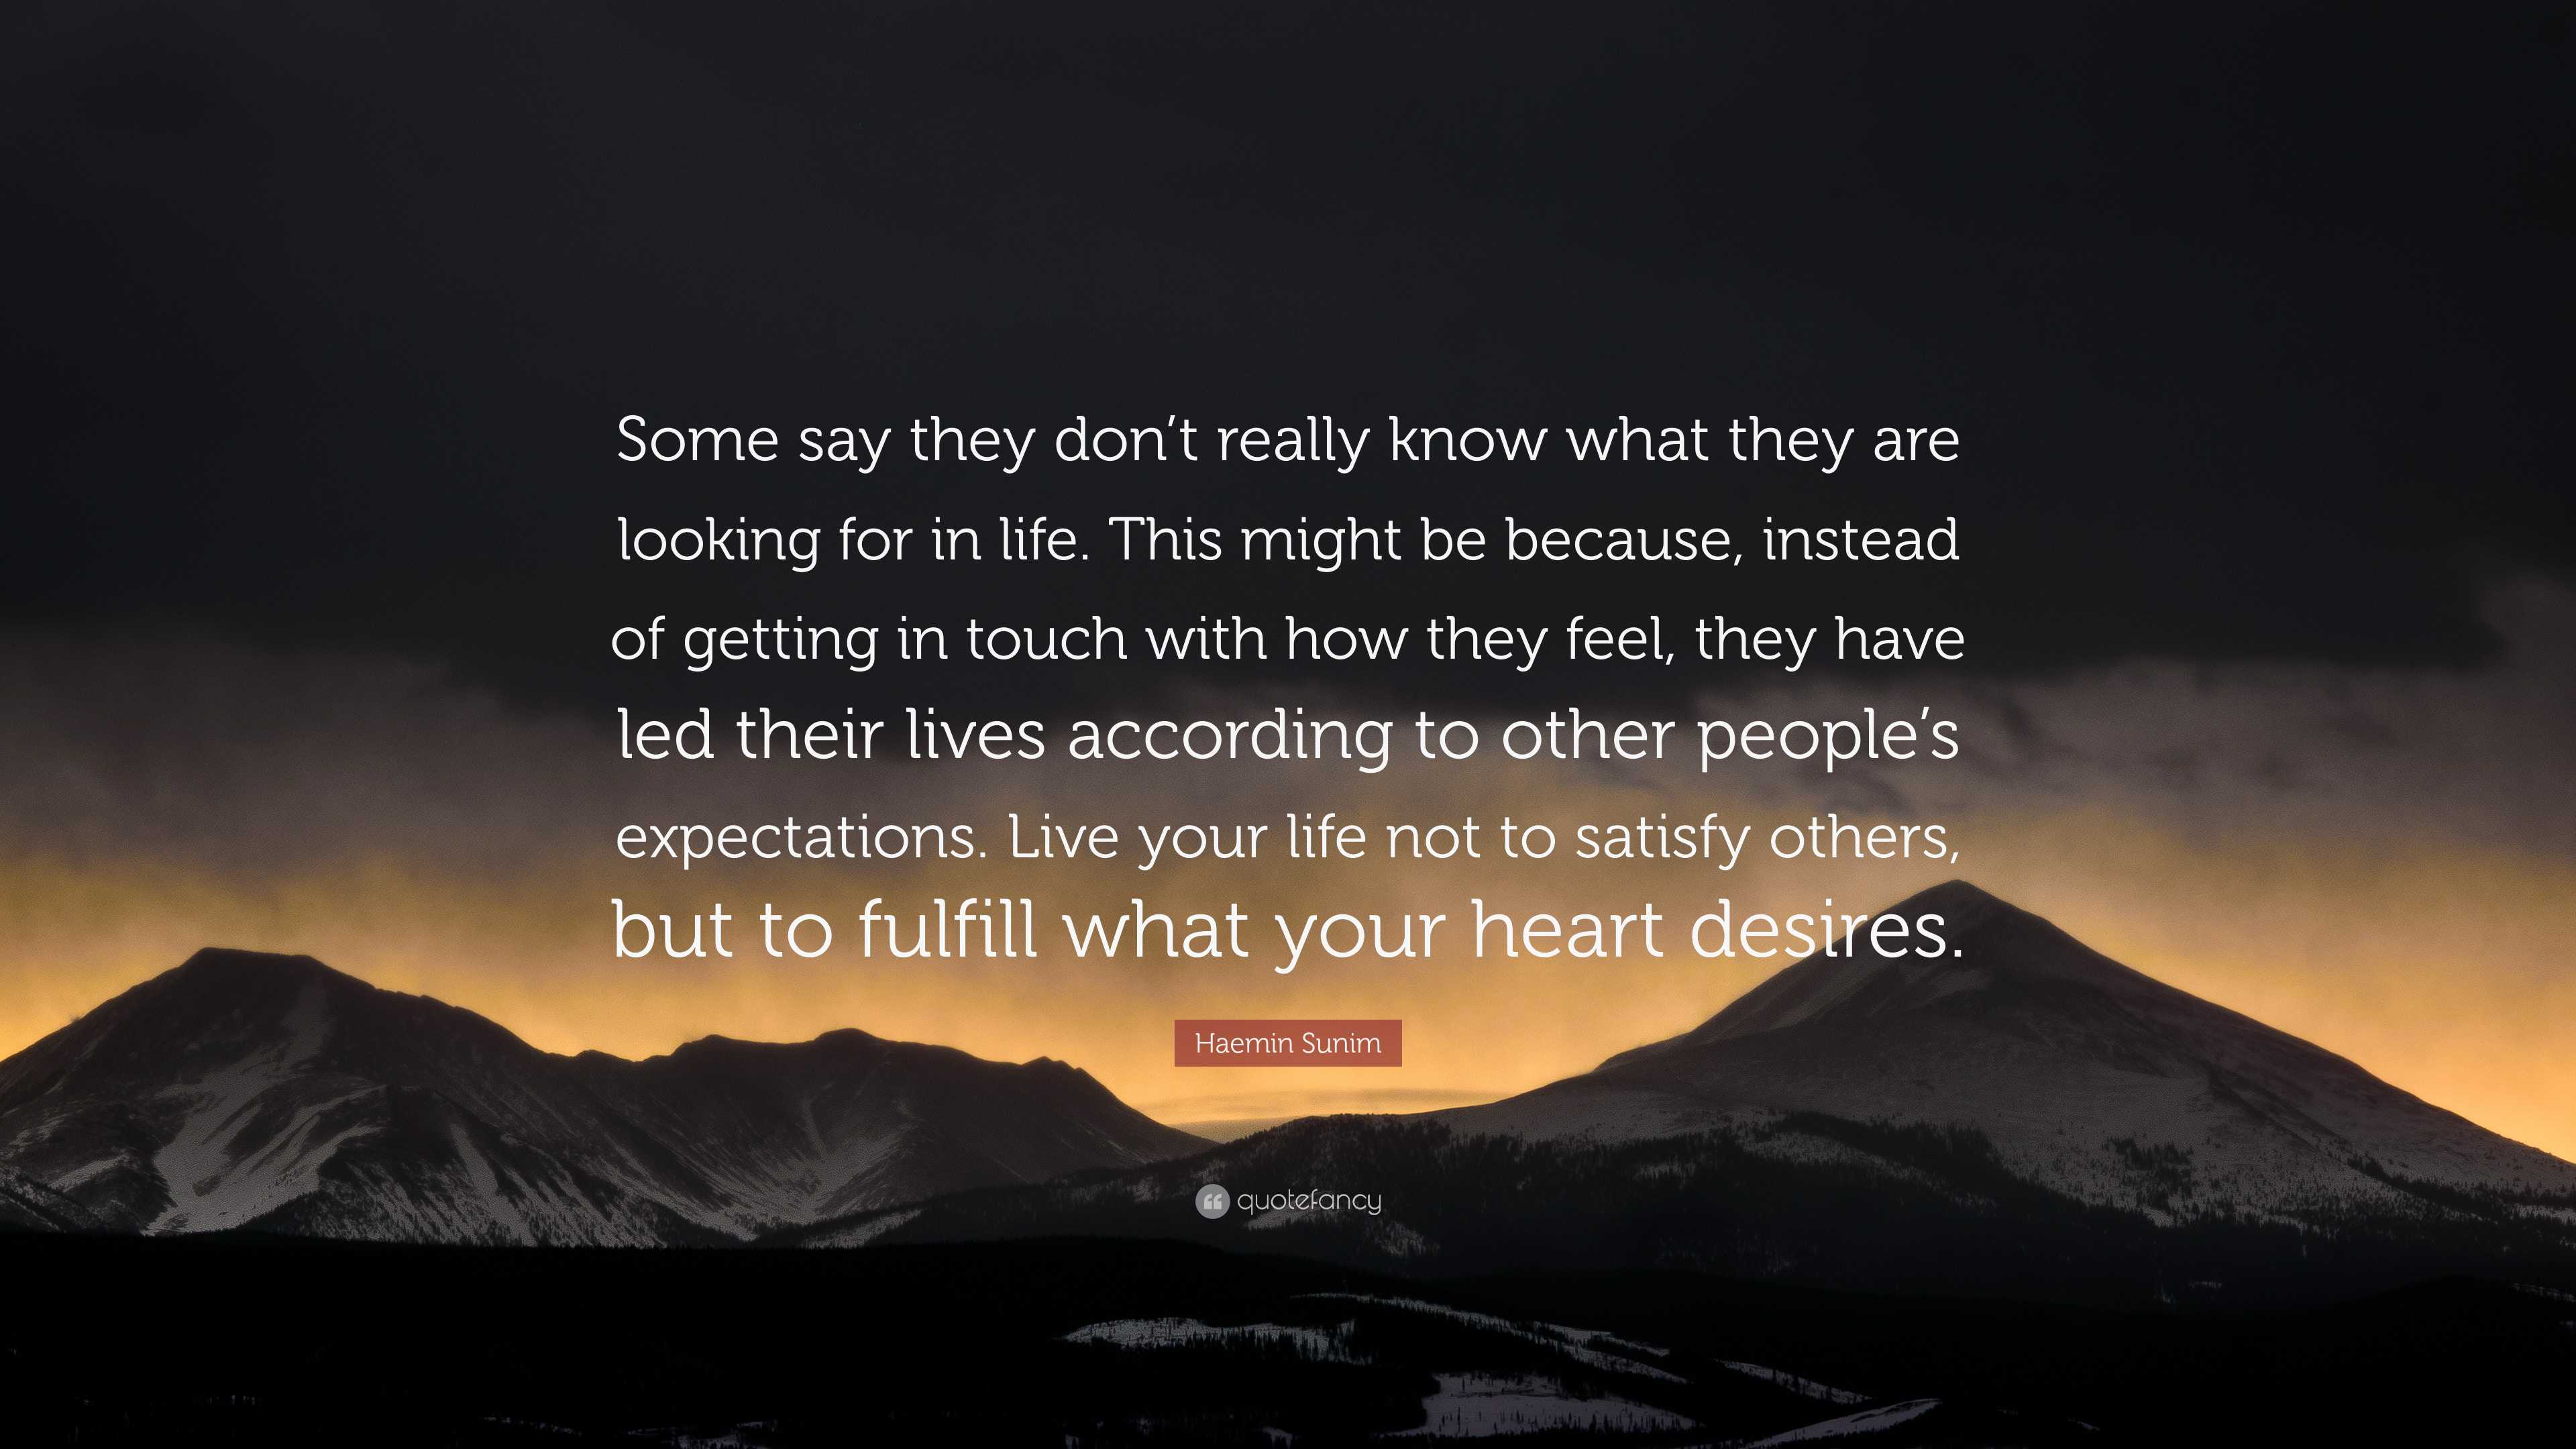 Haemin Sunim Quote: “Some say they don’t really know what they are ...